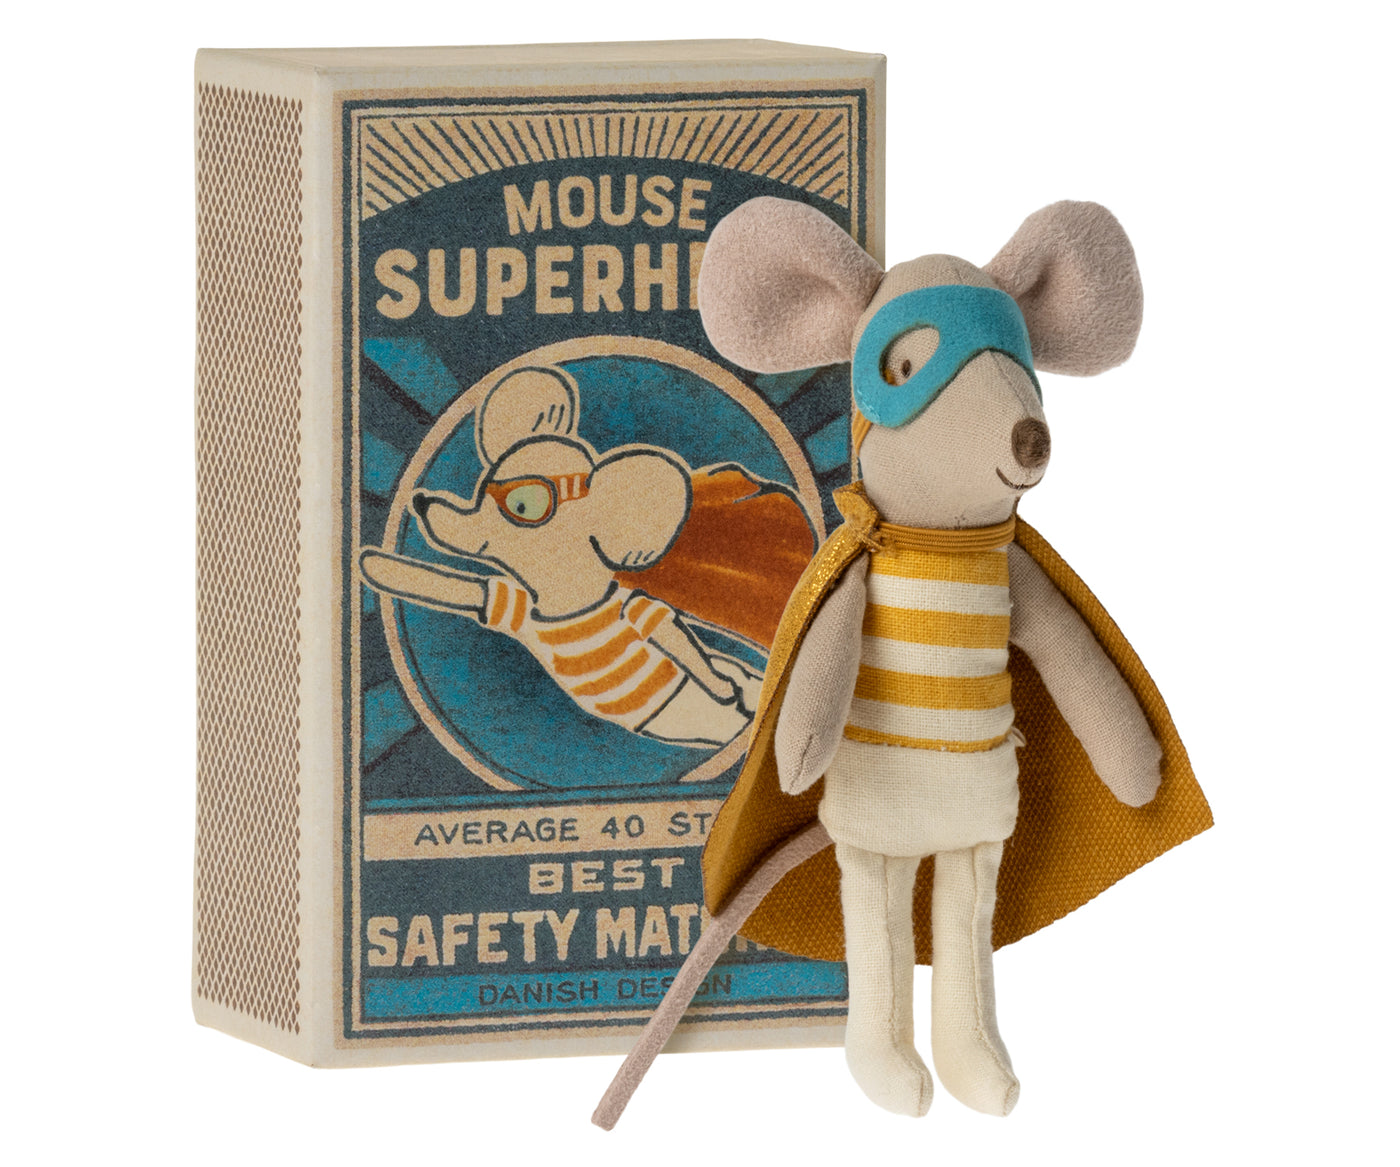 Super hero mouse, Little brother in matchbox